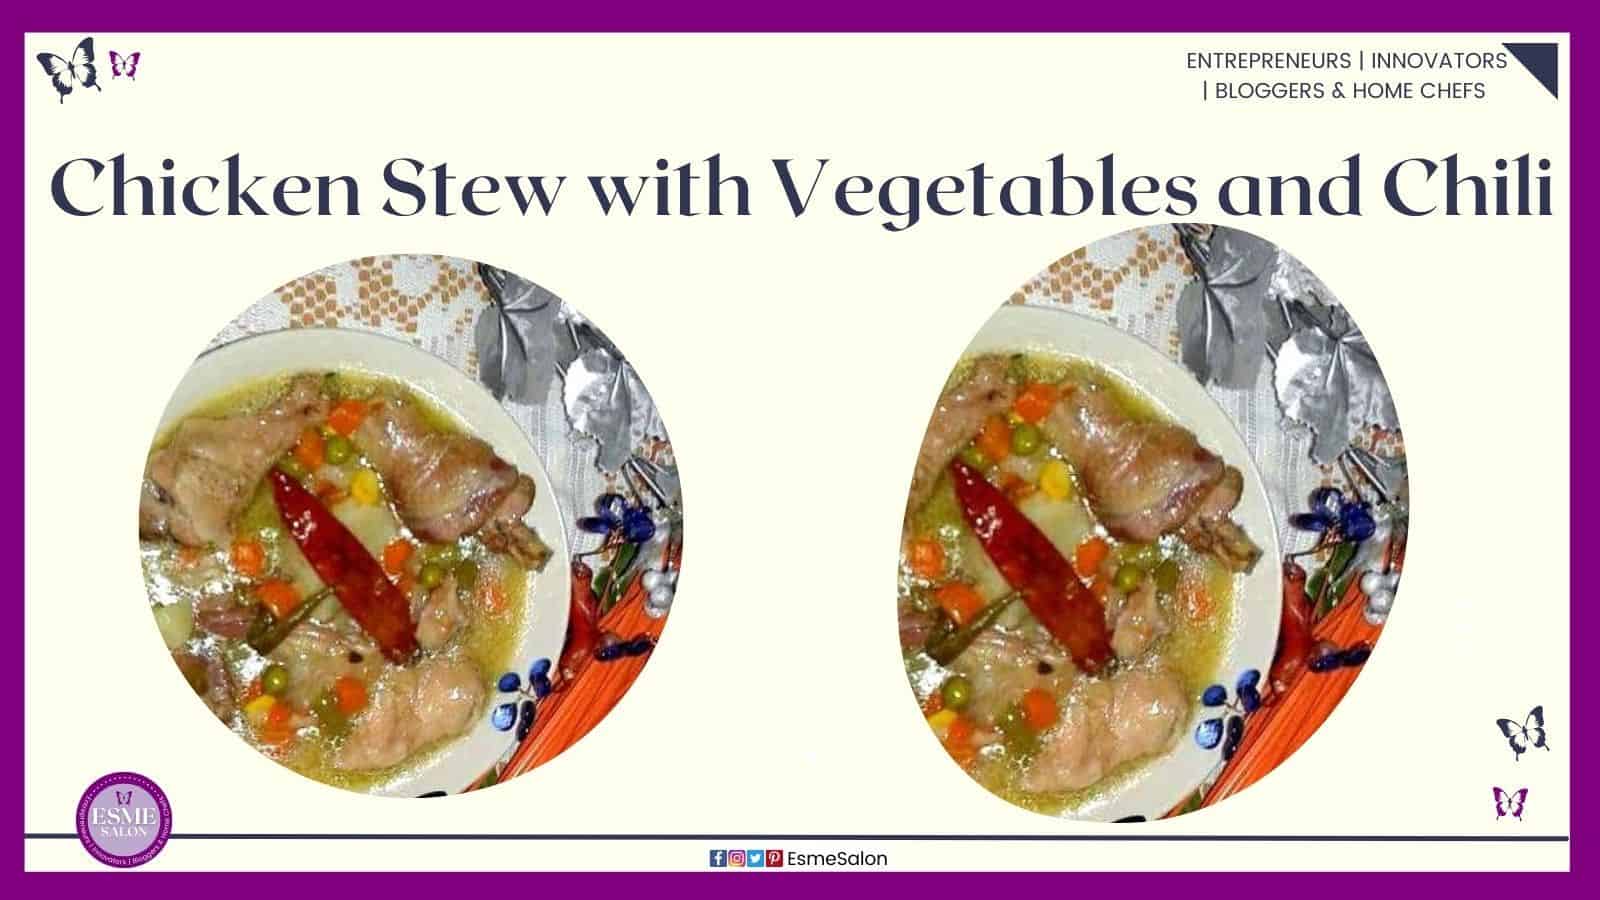 an image of Chicken Stew with Vegetables and Chili plated for serving with a red chili for flavor and decoration